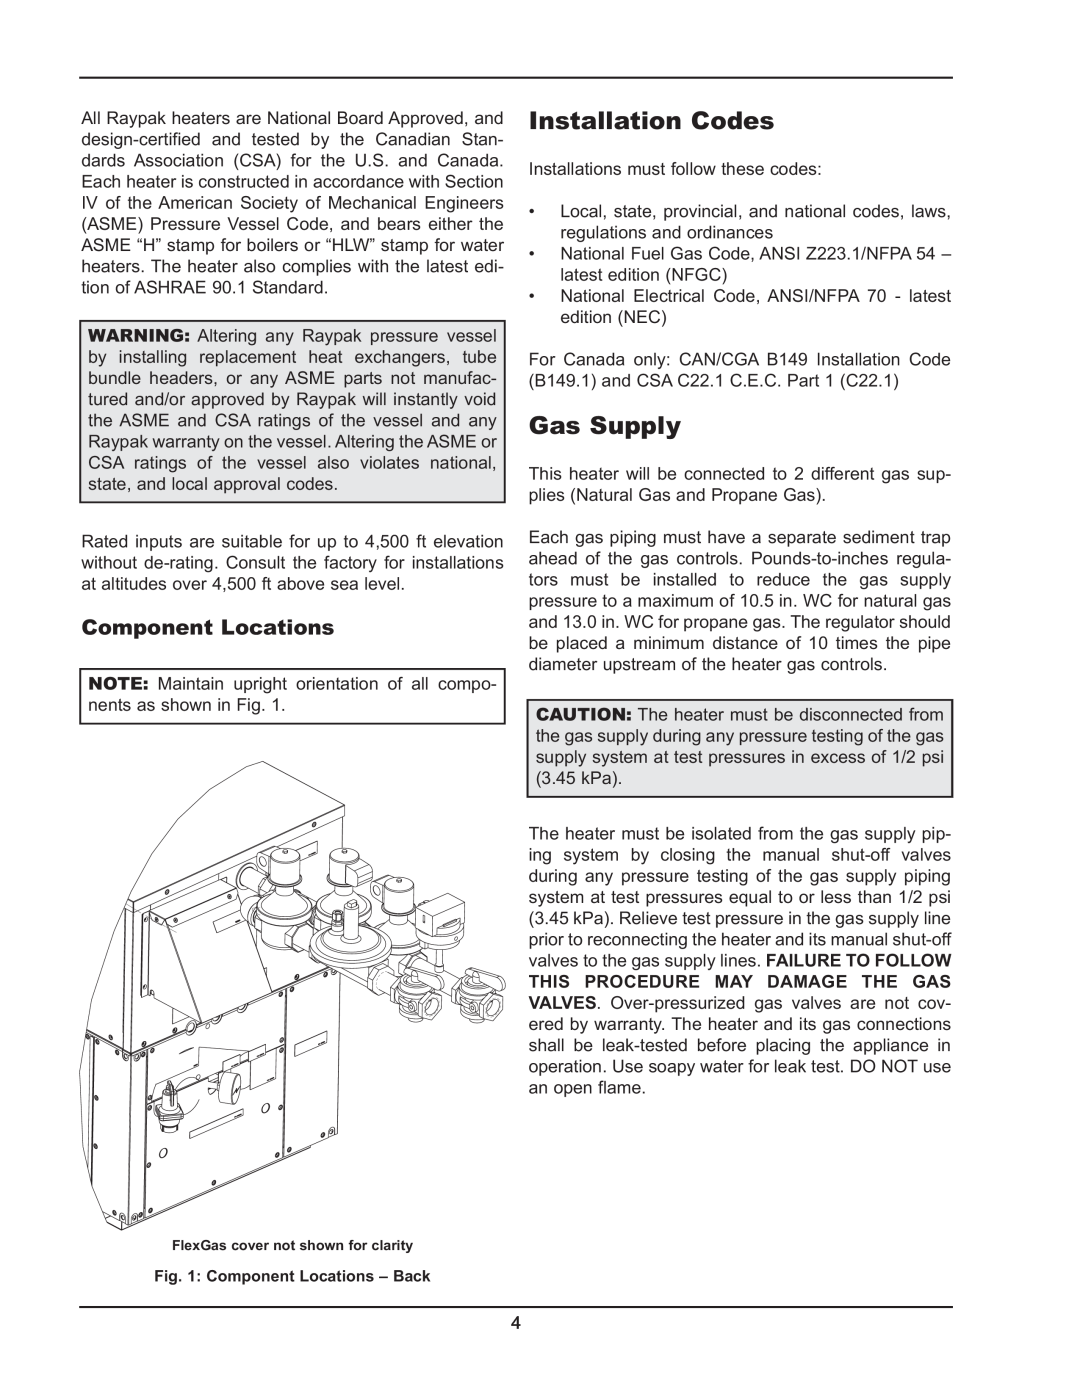 Raypak 302BD-2342BD instruction manual Installation Codes, Gas Supply, Component Locations 